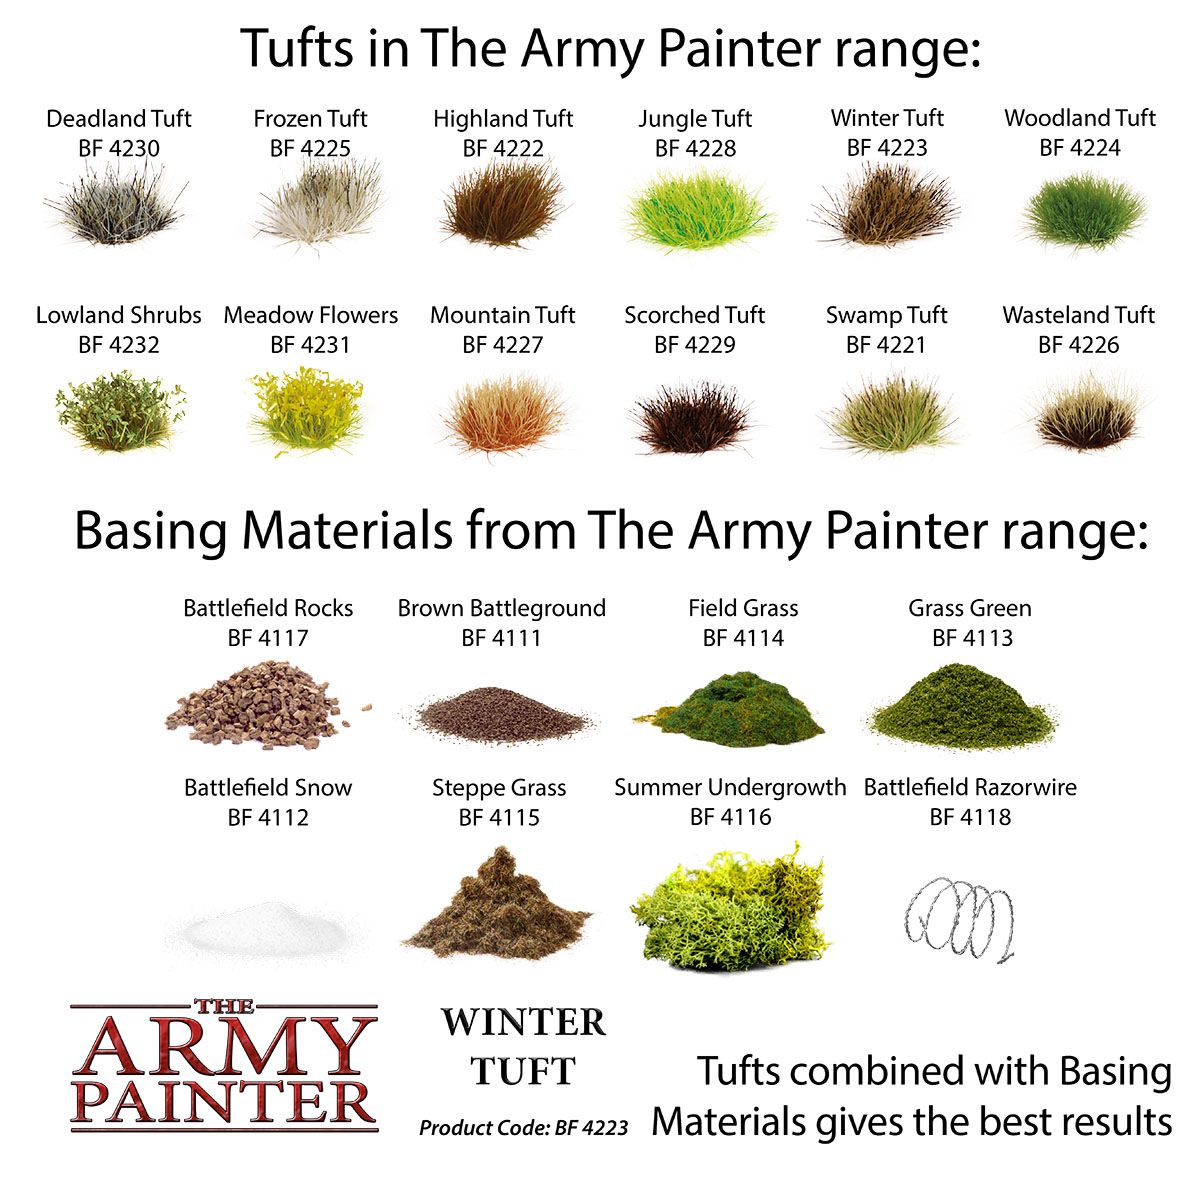 Winter Tufts (The Army Painter)